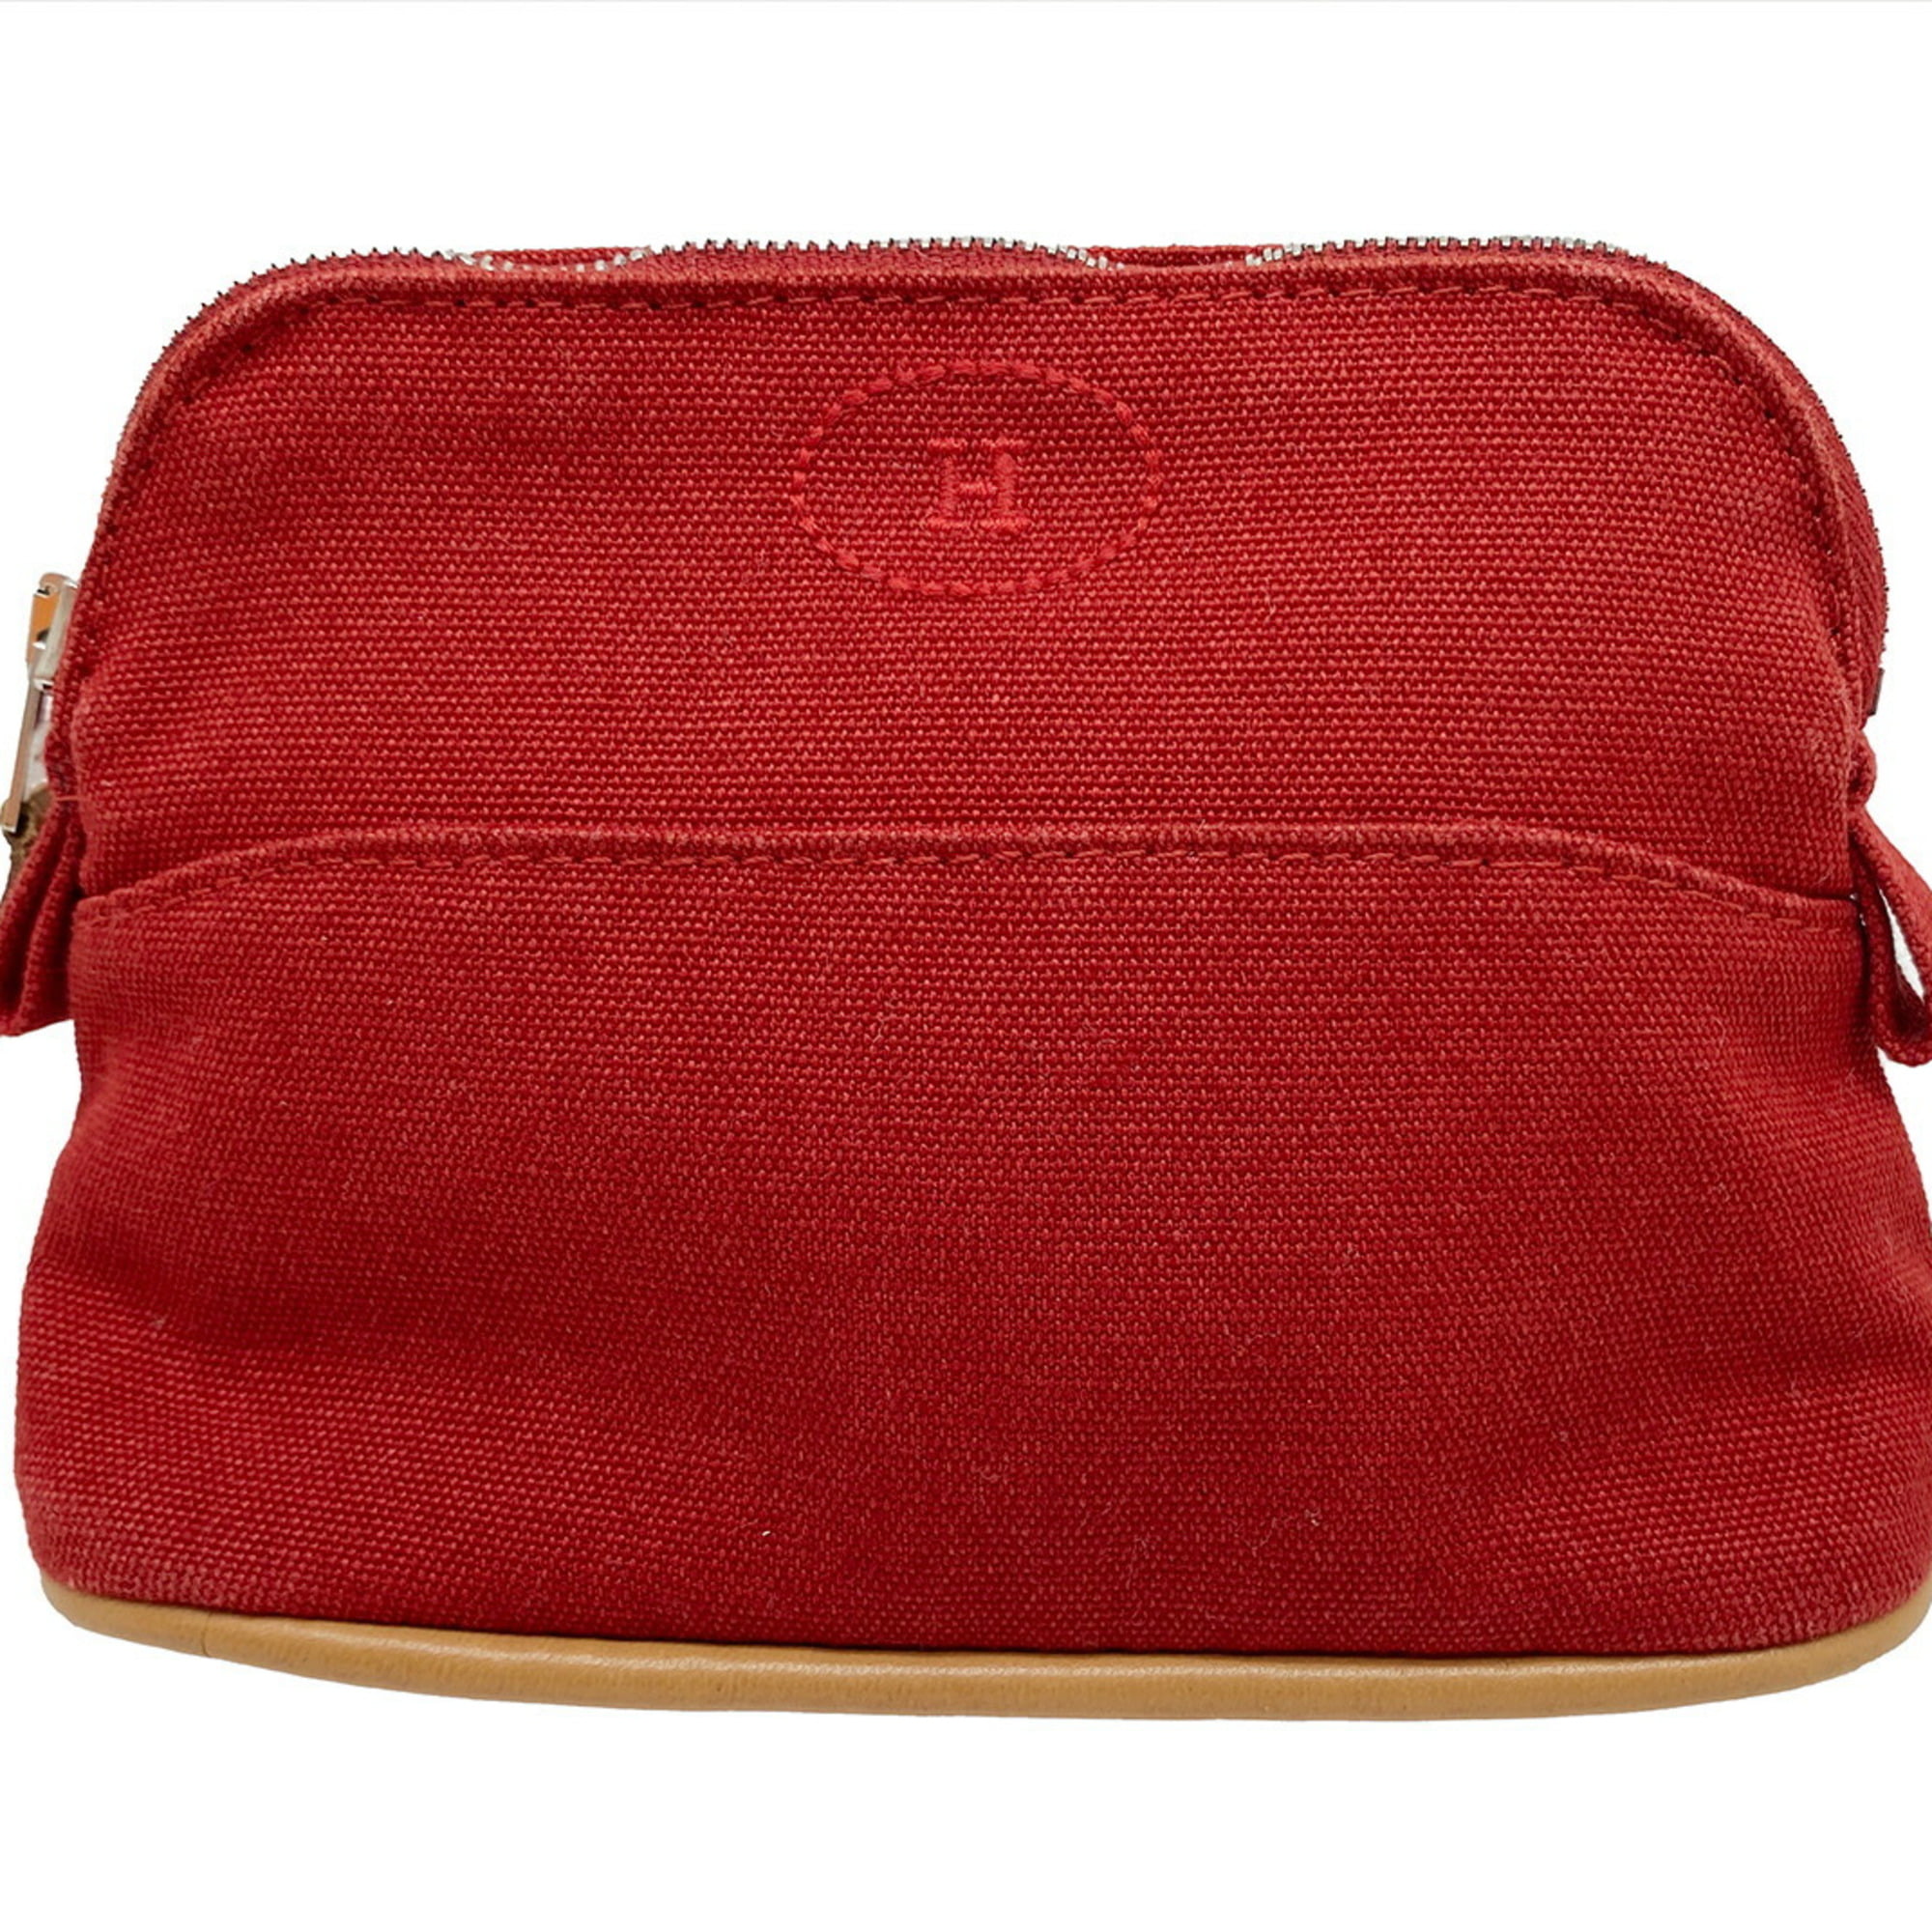 Hermès Ardennes Bolide 45 - Red Luggage and Travel, Handbags